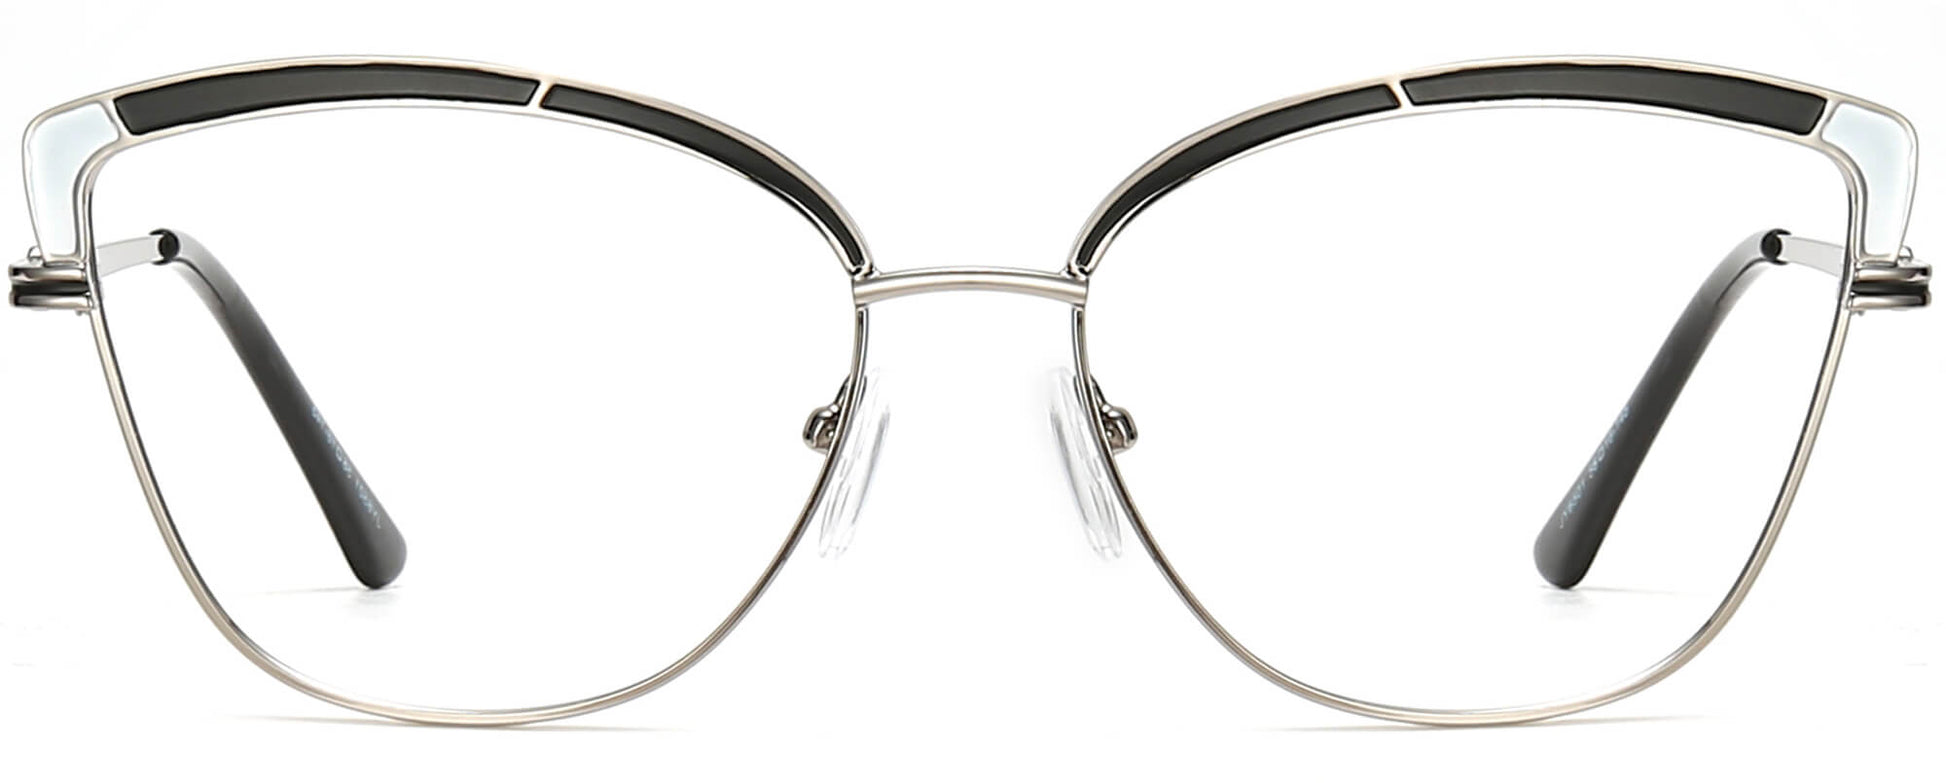 Rylie Cateye Silver Eyeglasses from ANRRI, front view